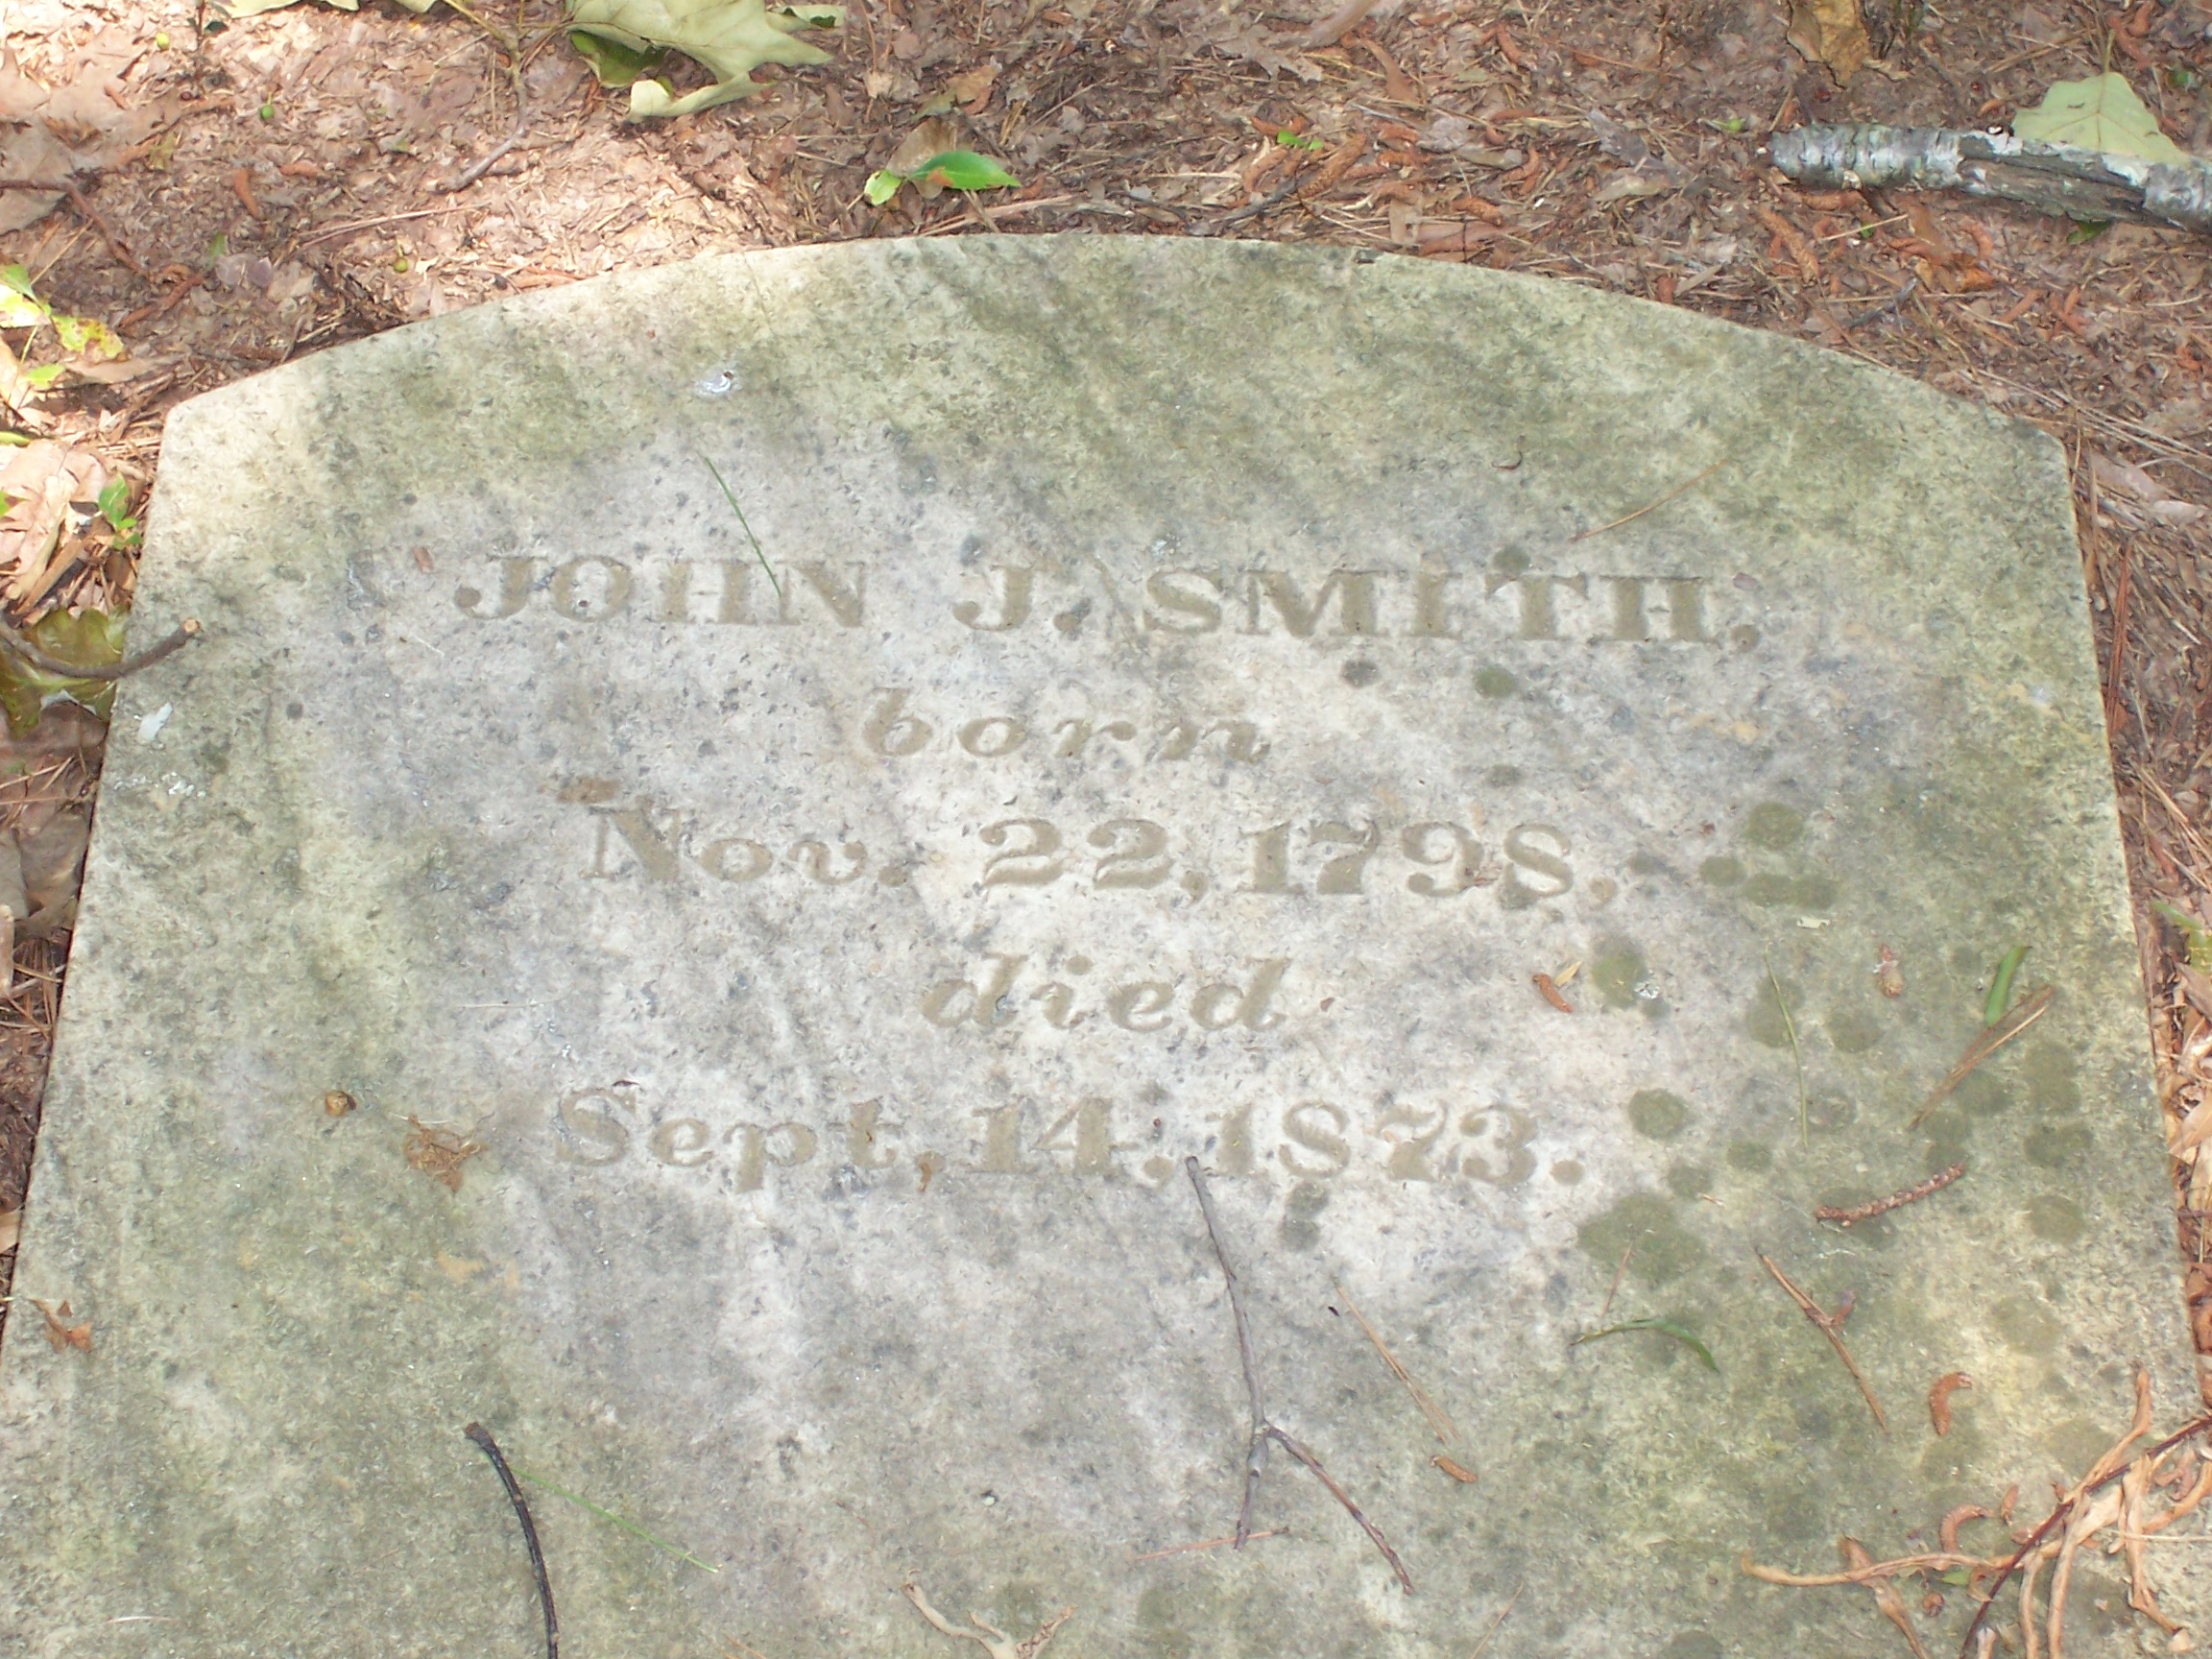 Headstone of John J. Smith, our Great Great Great Grandfather, buried in the family cemetery near his last house in Cartersville, Bartow County, Georgia